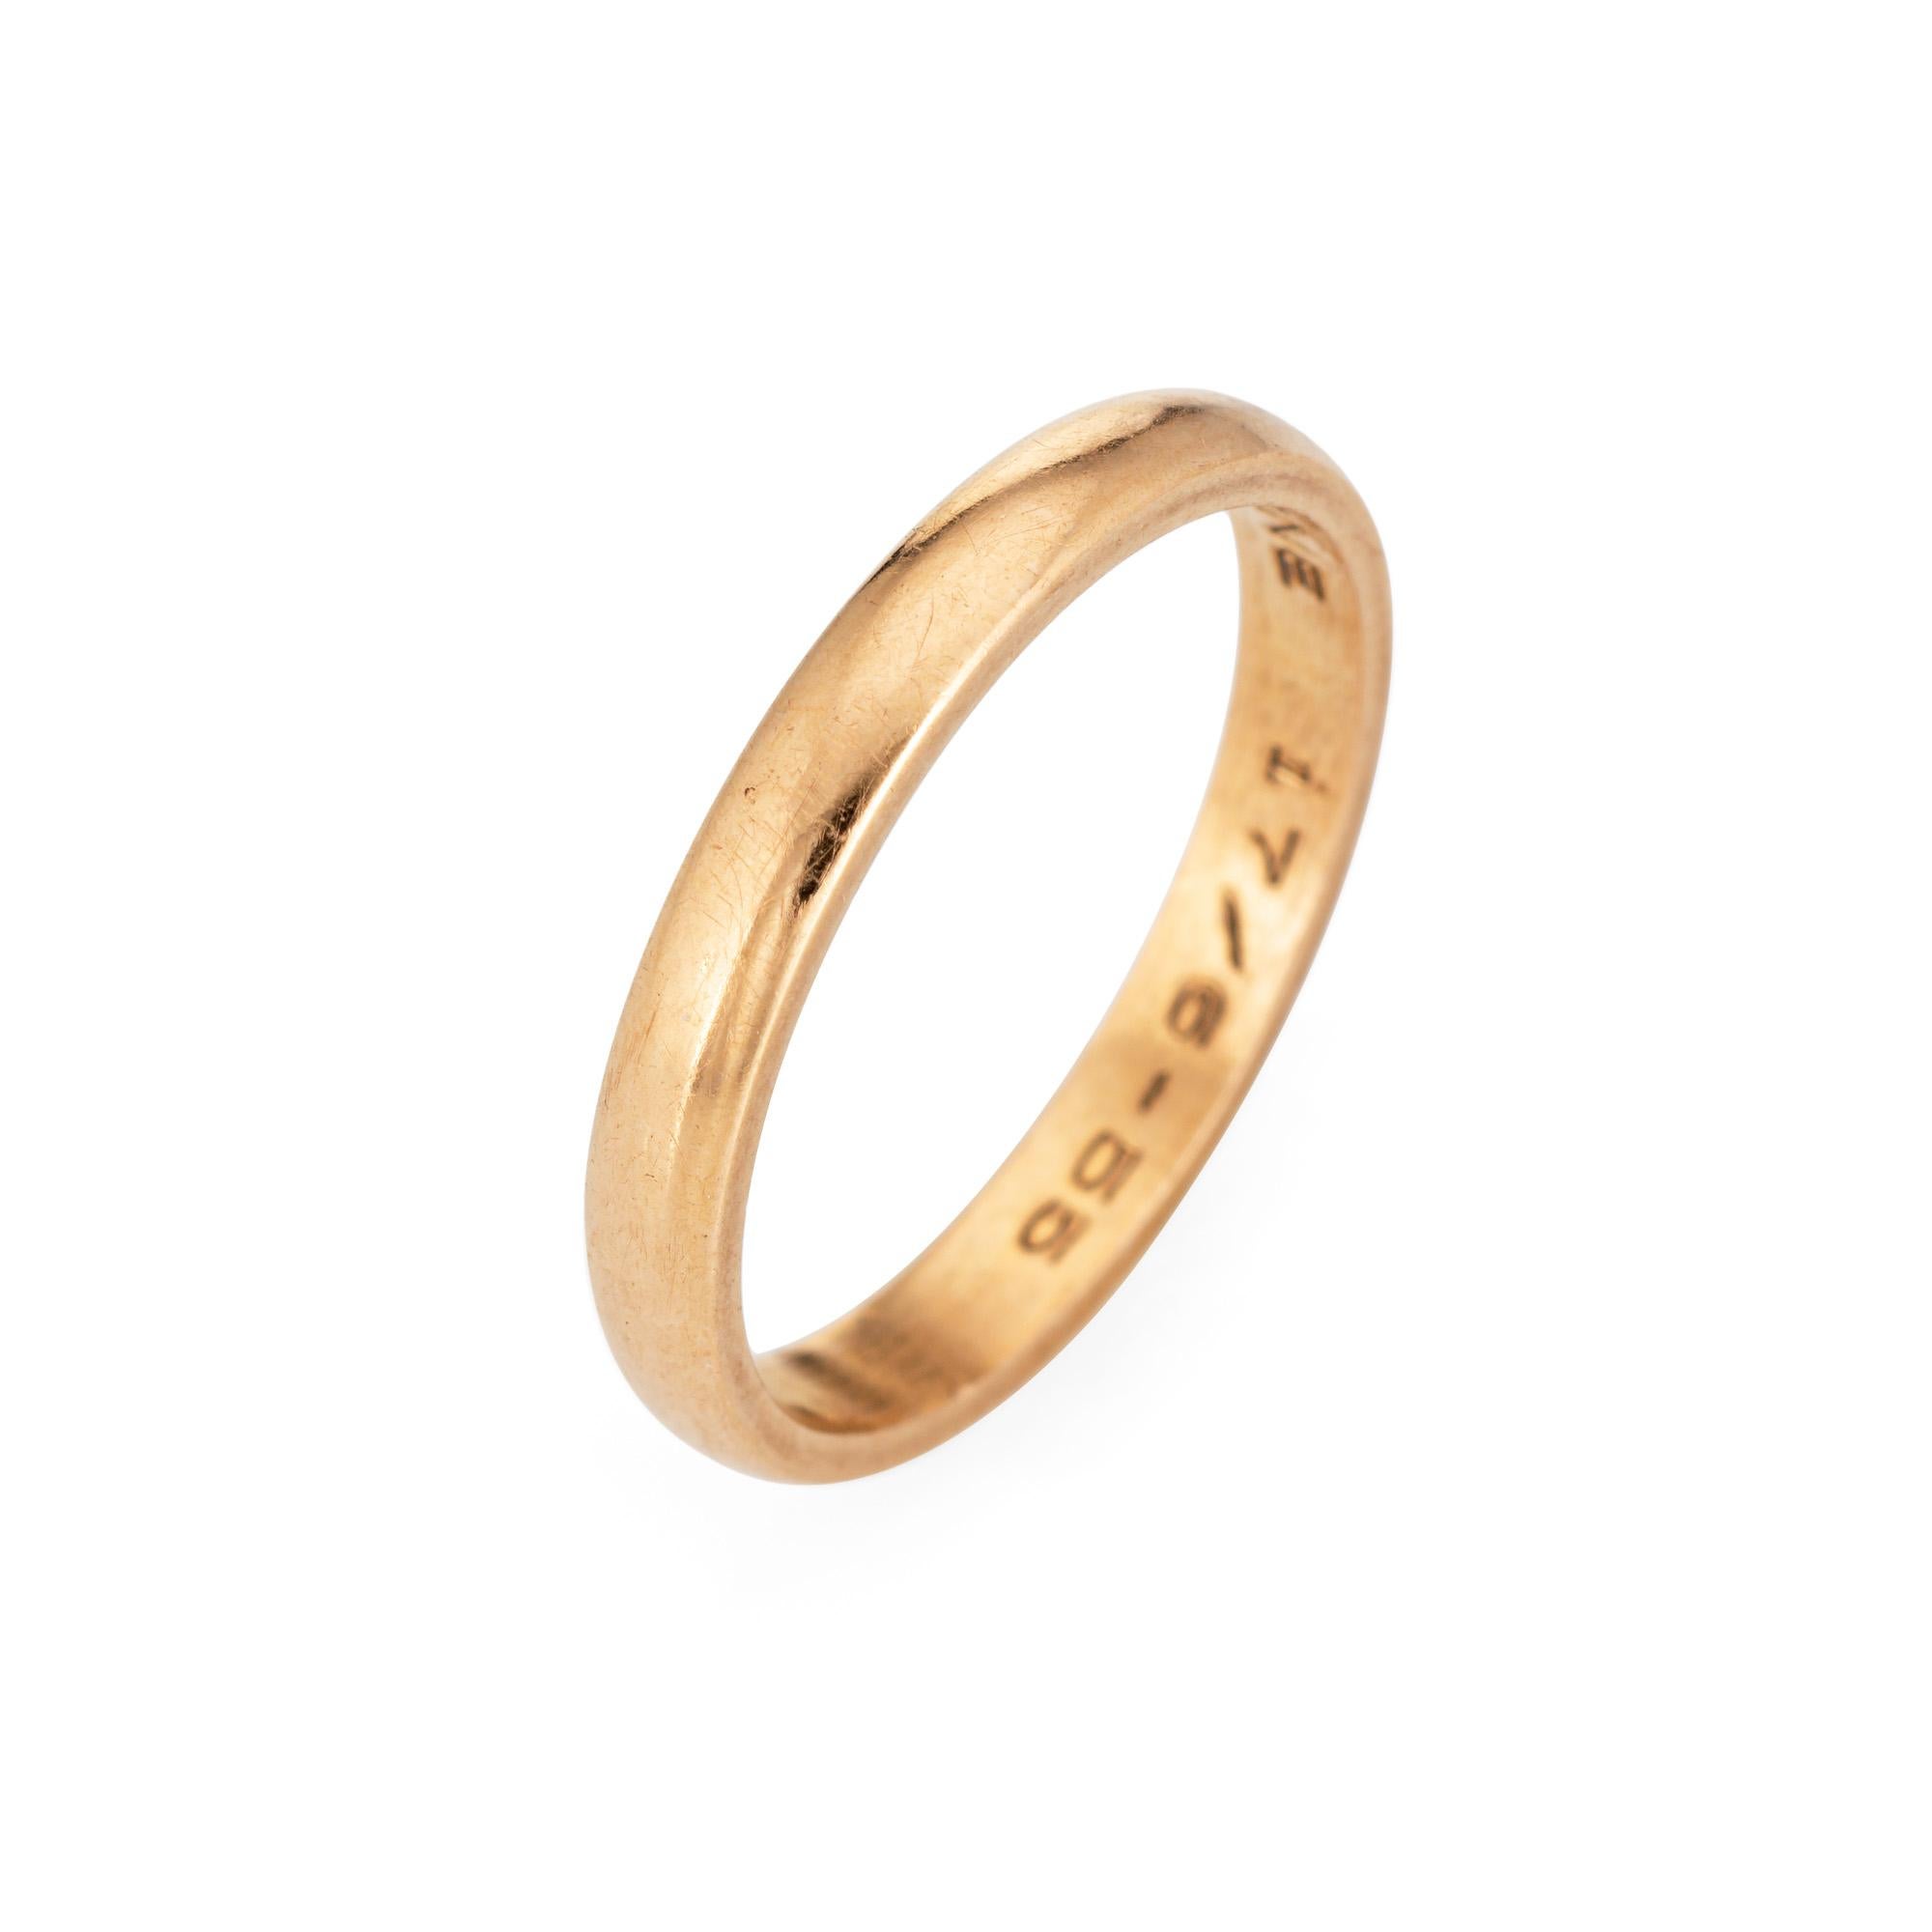 Elegant vintage wedding band (circa 1950s), crafted in 18 karat yellow gold. 

The simple and elegant ring is stamped with Swedish hallmarks. The inner band is engraved 